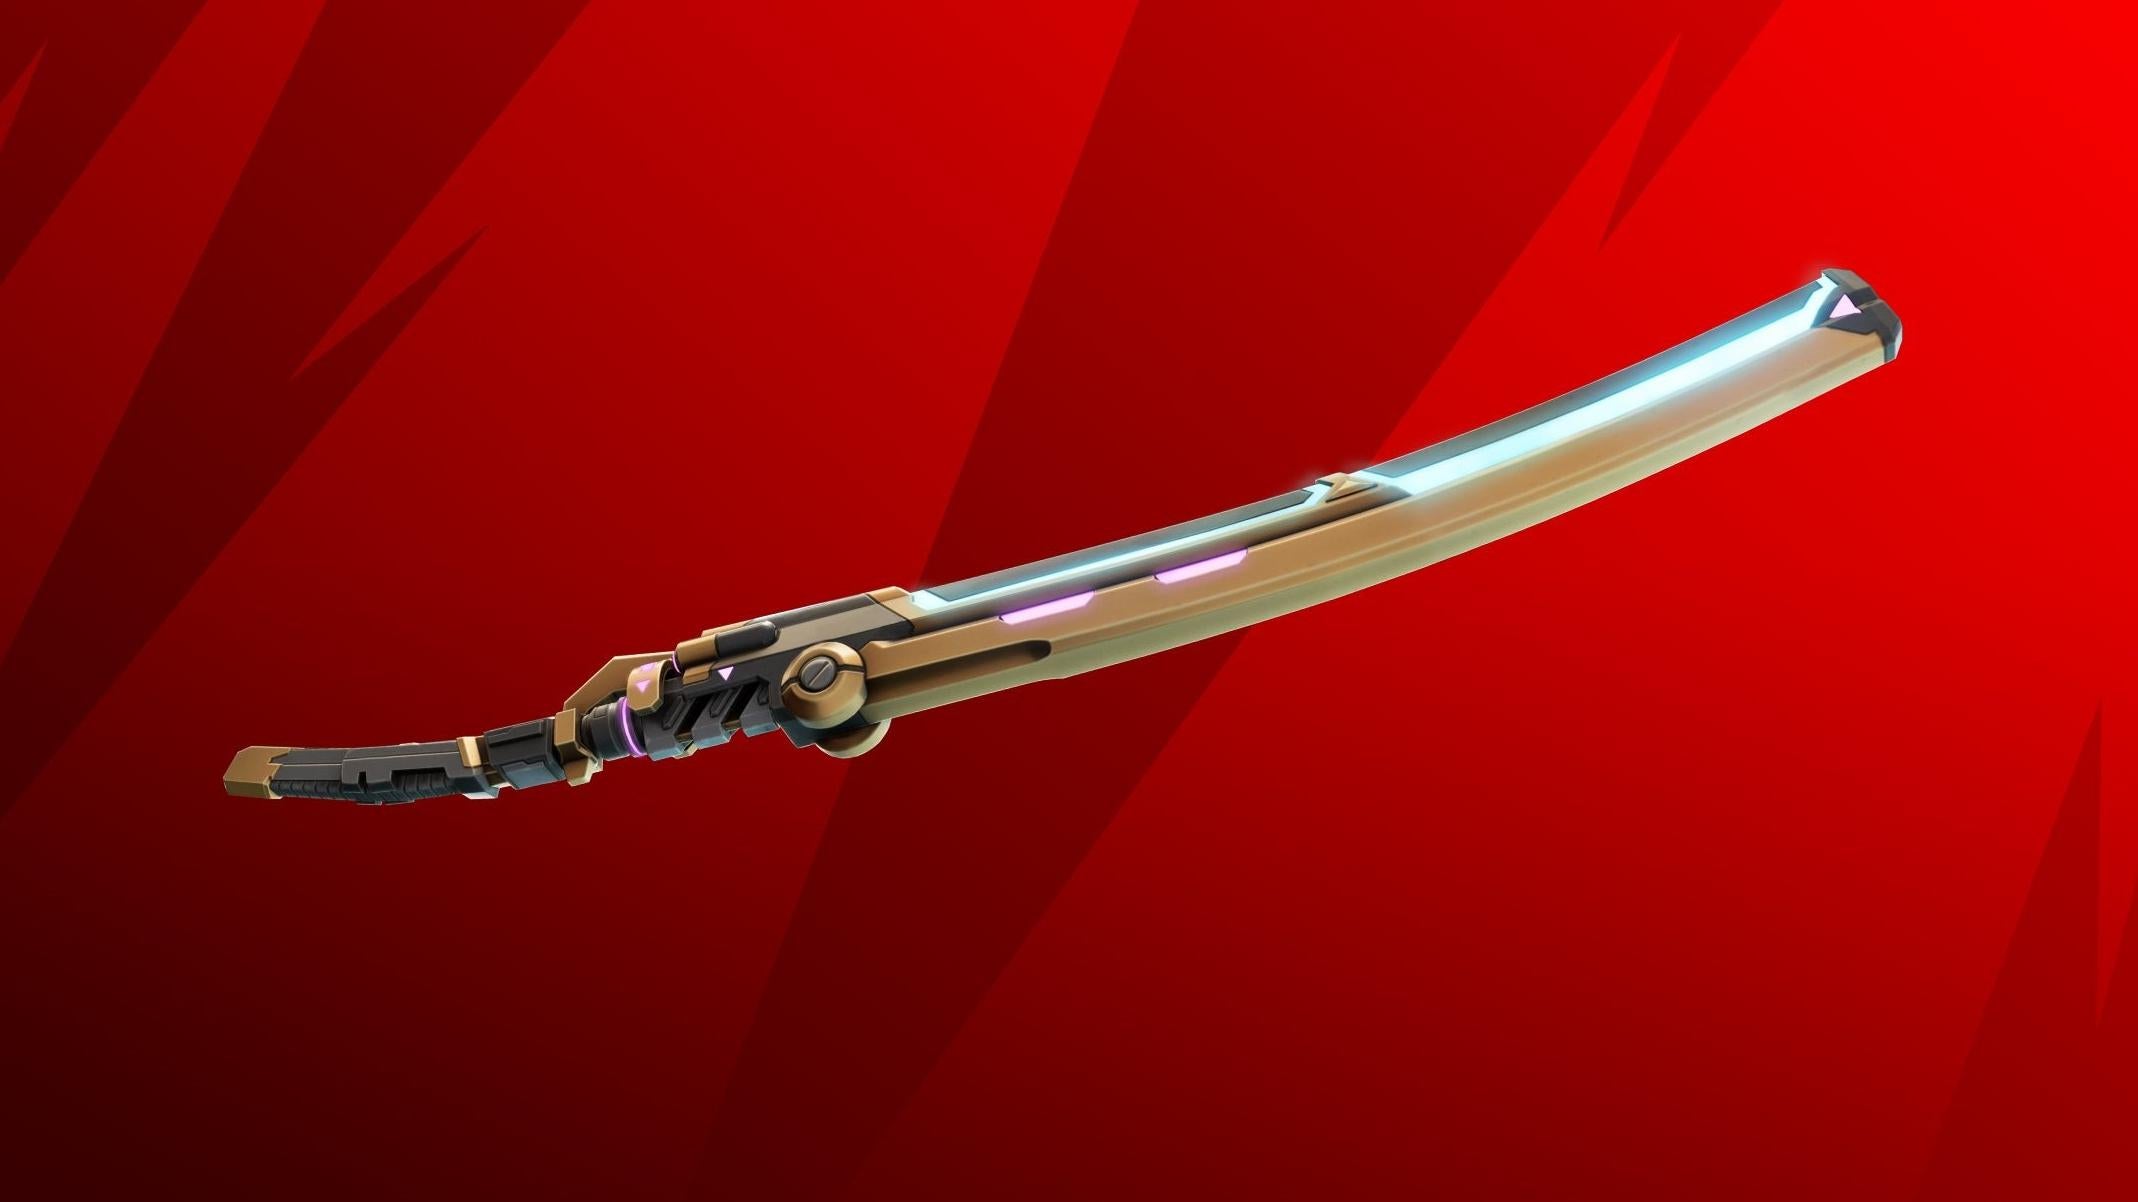 The Fortnite kinetic blade is displayed against a red background.